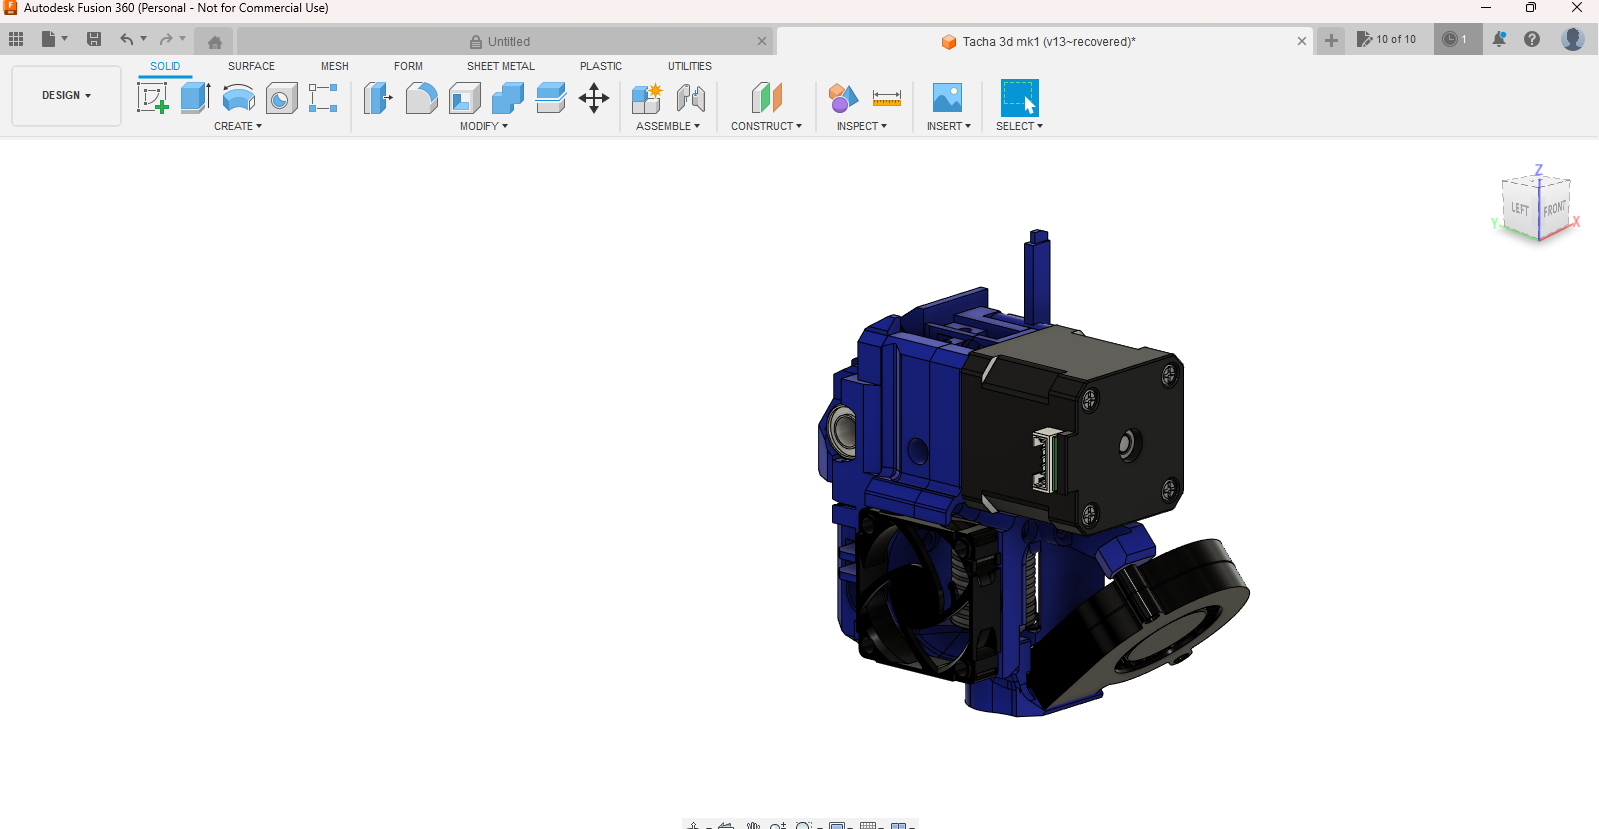 Autodesk Fusion 360 (Personal - Not for Commercial Use) 6_29_2023 10_13_27 PM.png